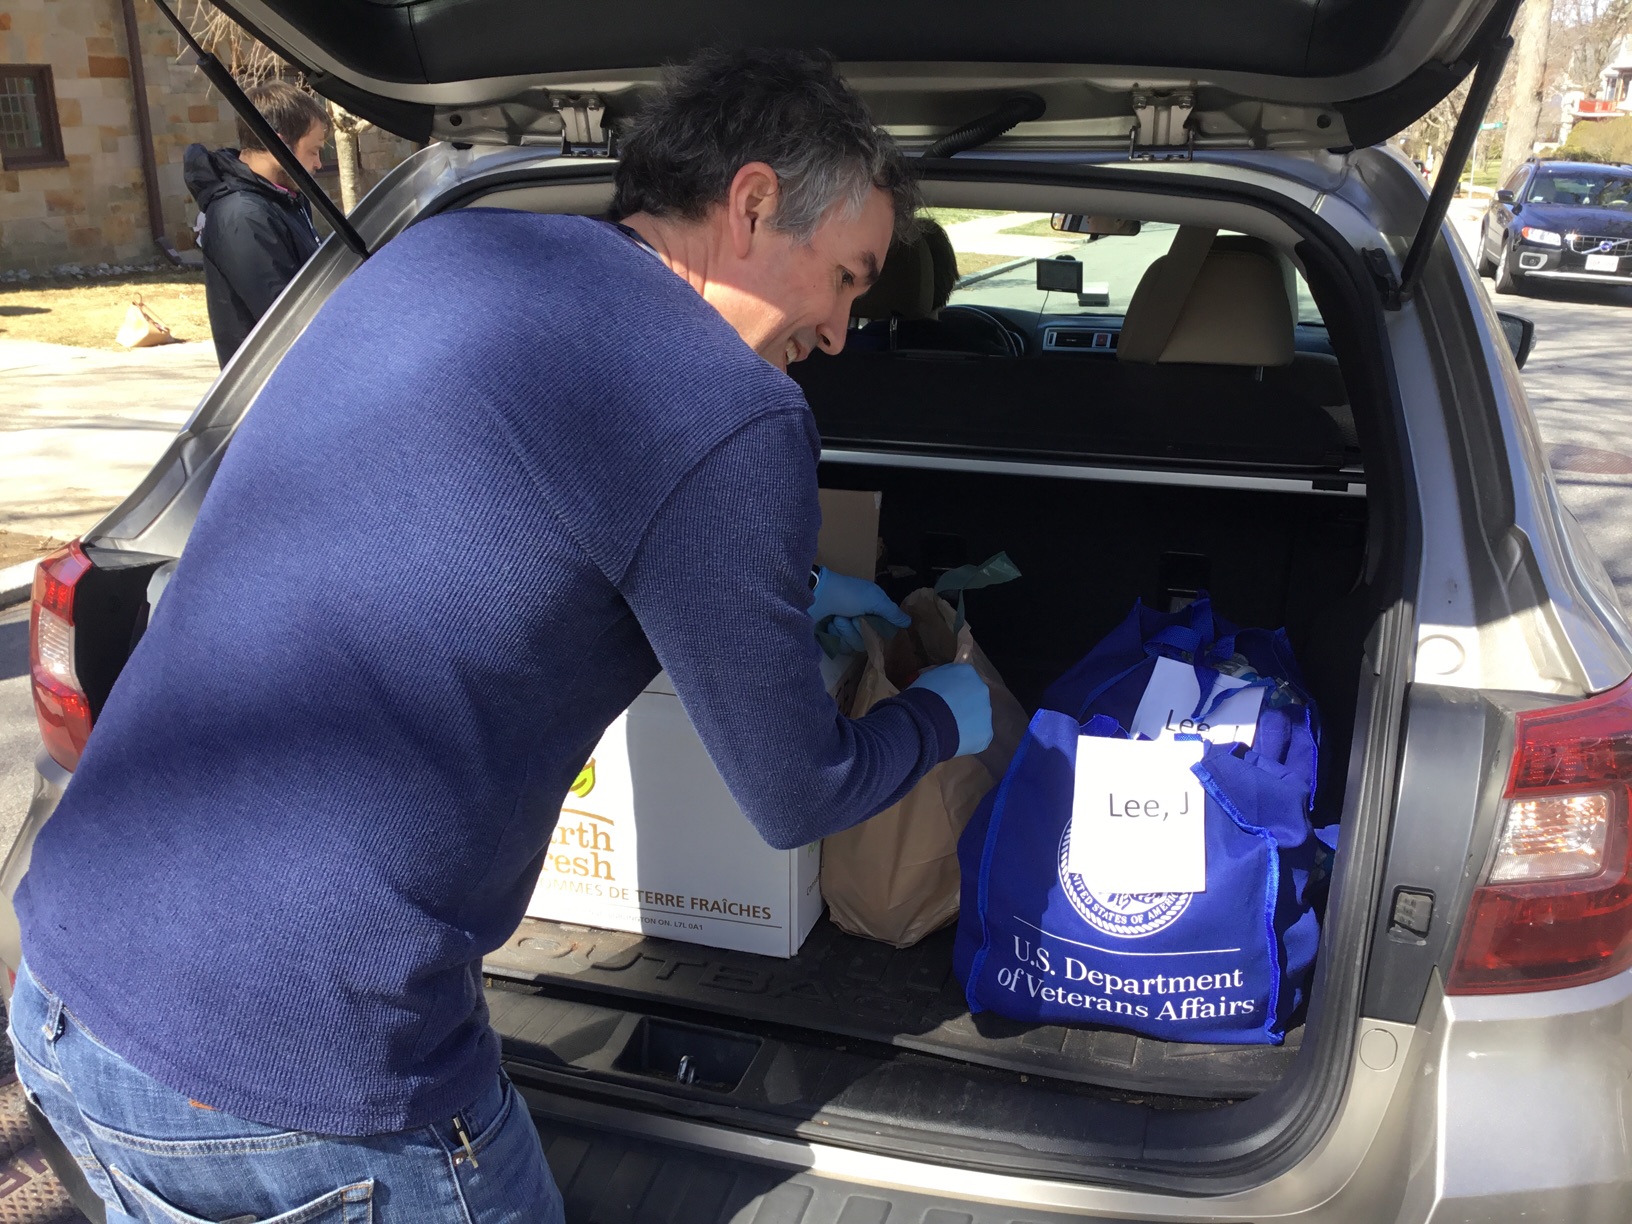 A man with surgical gloves on, half-turns and smiles at the camera as he loads packages into a hatchback's trunk.